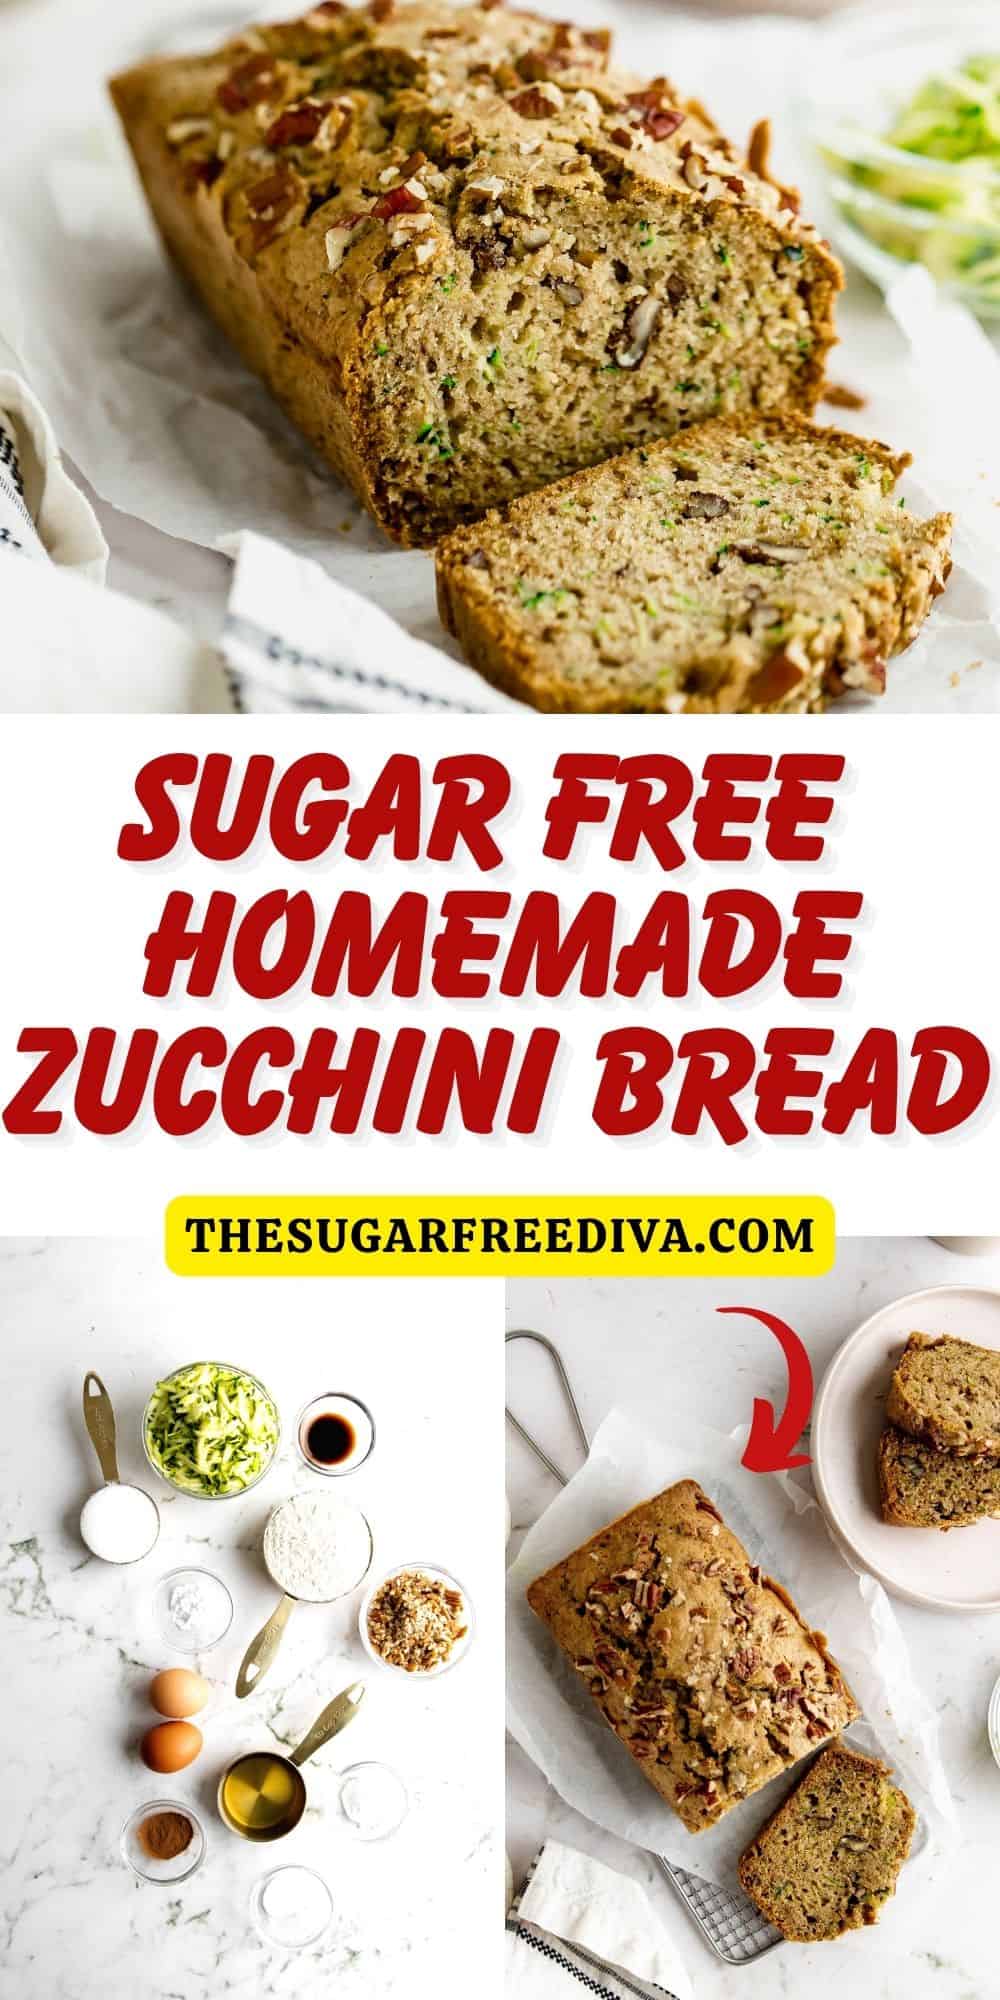 Sugar free homemade zucchini bread, a simple delicious and flavorful dessert,snack or breakfast recipe made with no added sugar. Low Carb GF option. Video 